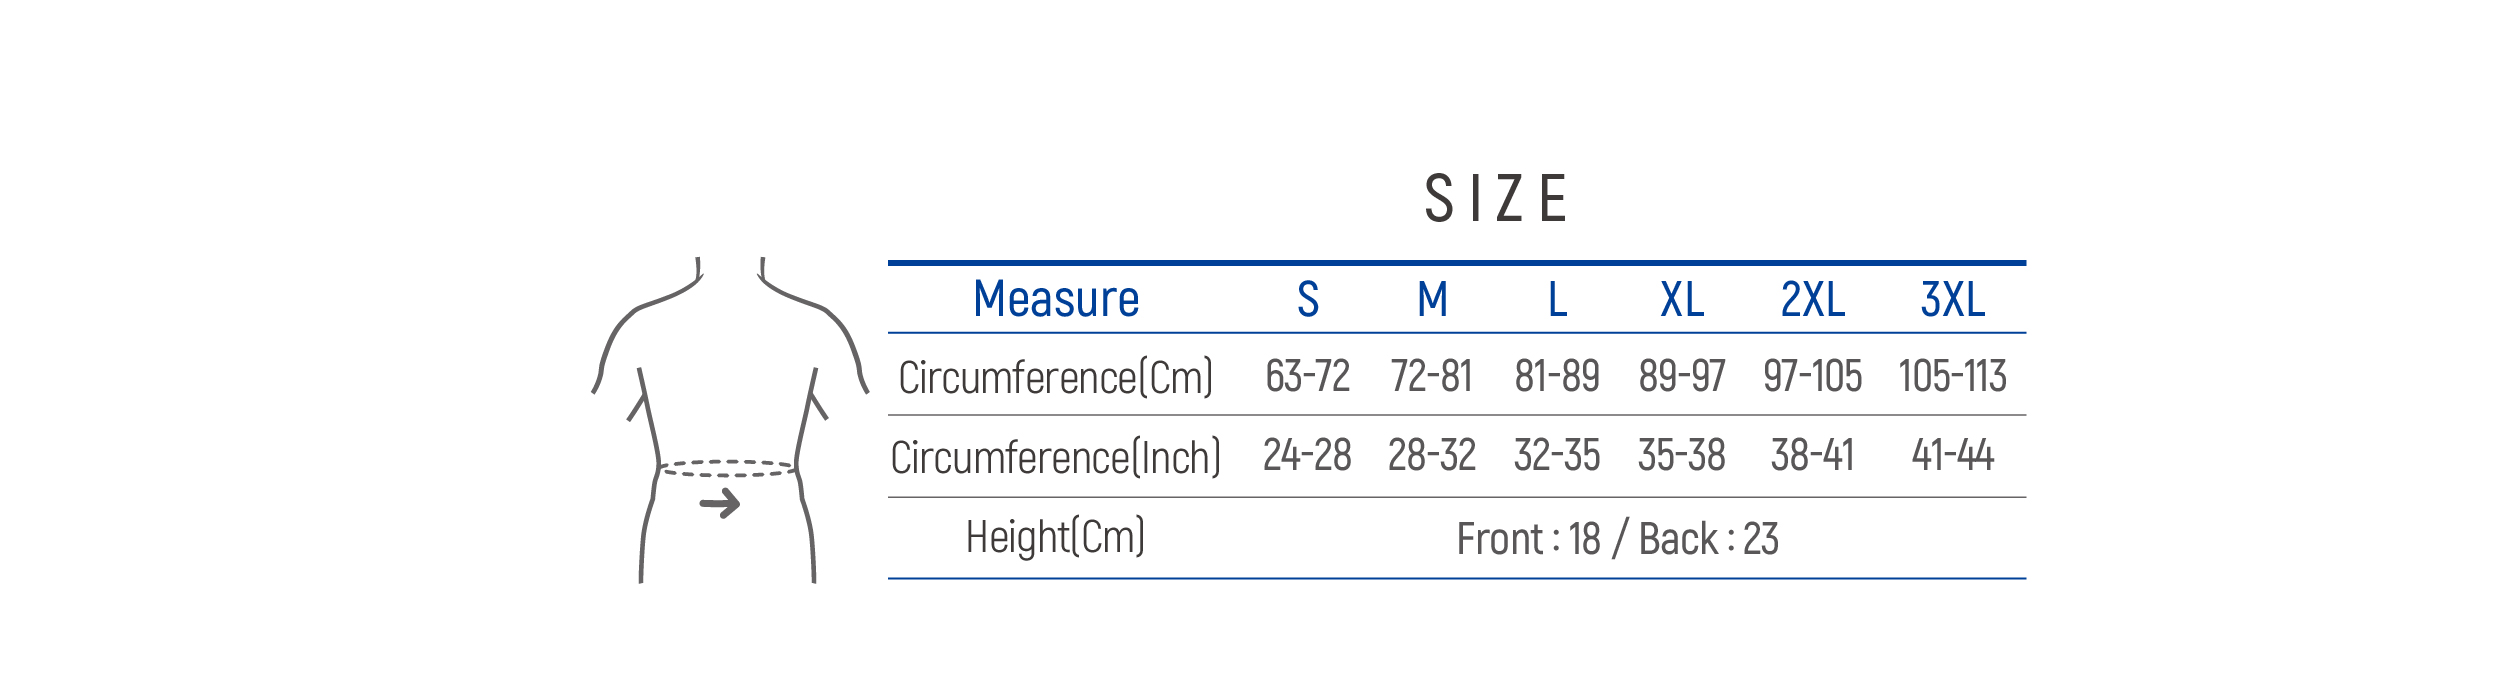 DR-B121 Size table image